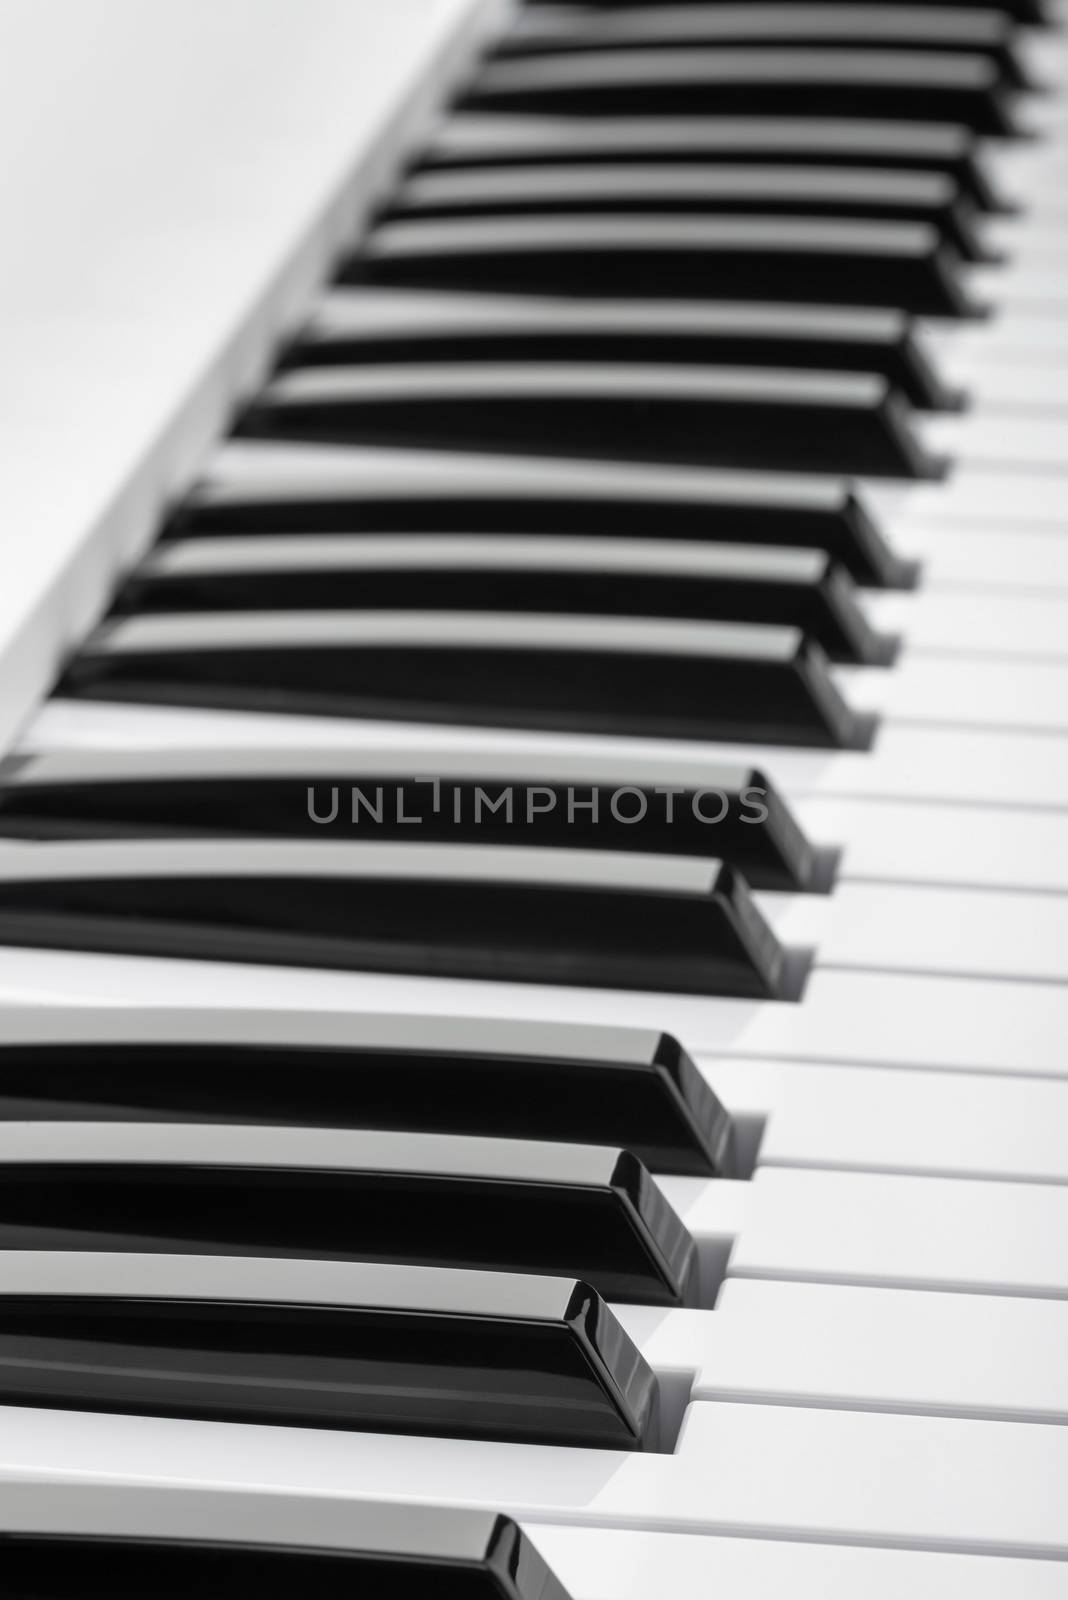 Black and white keys of a music keyboard by MaxalTamor